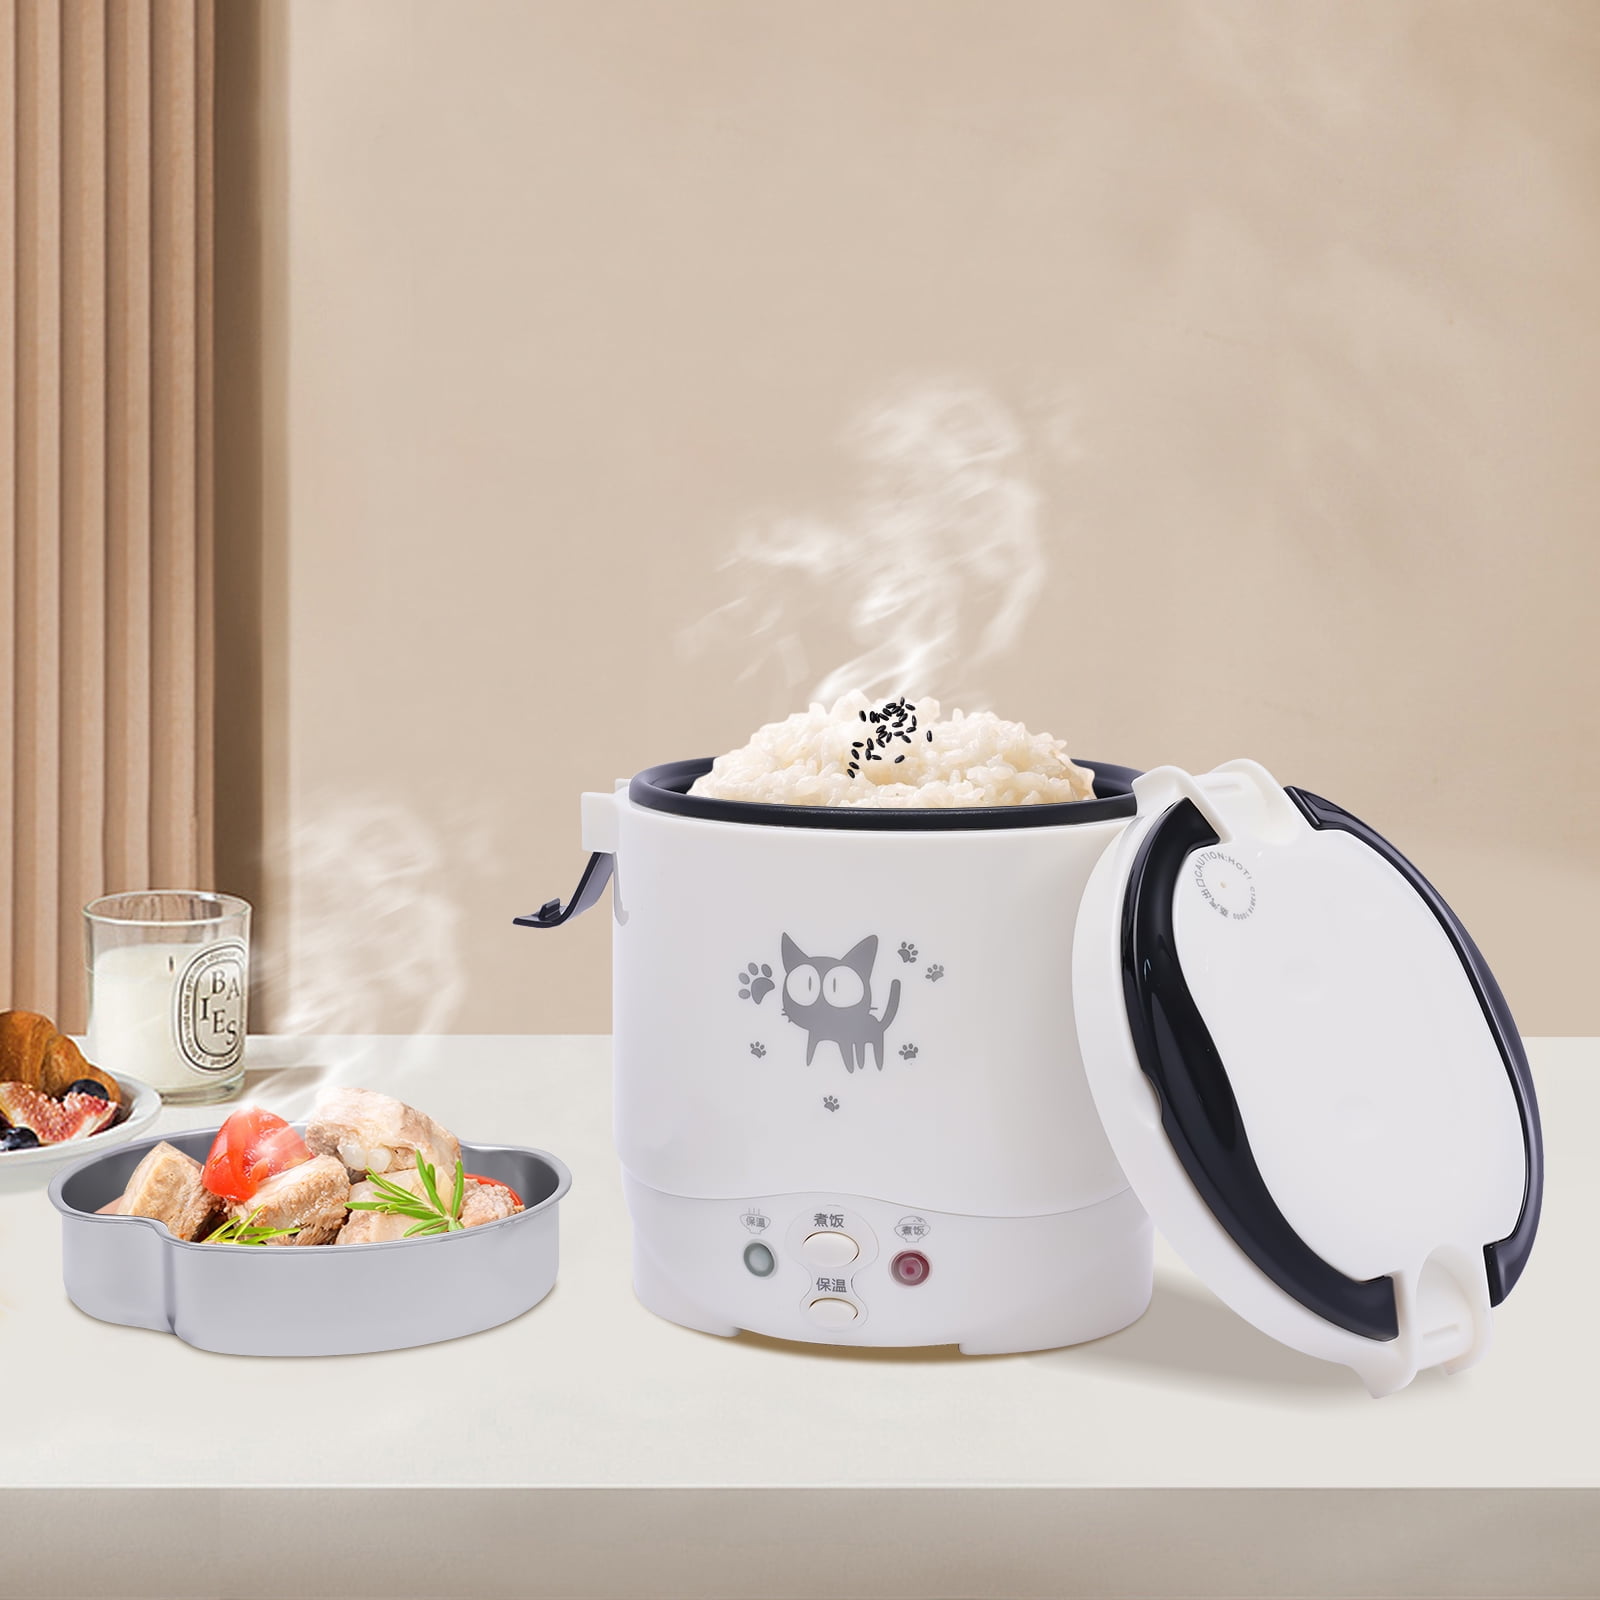 Multi-functional Microwave Rice Cooker Steamer, New Plastic Lunch